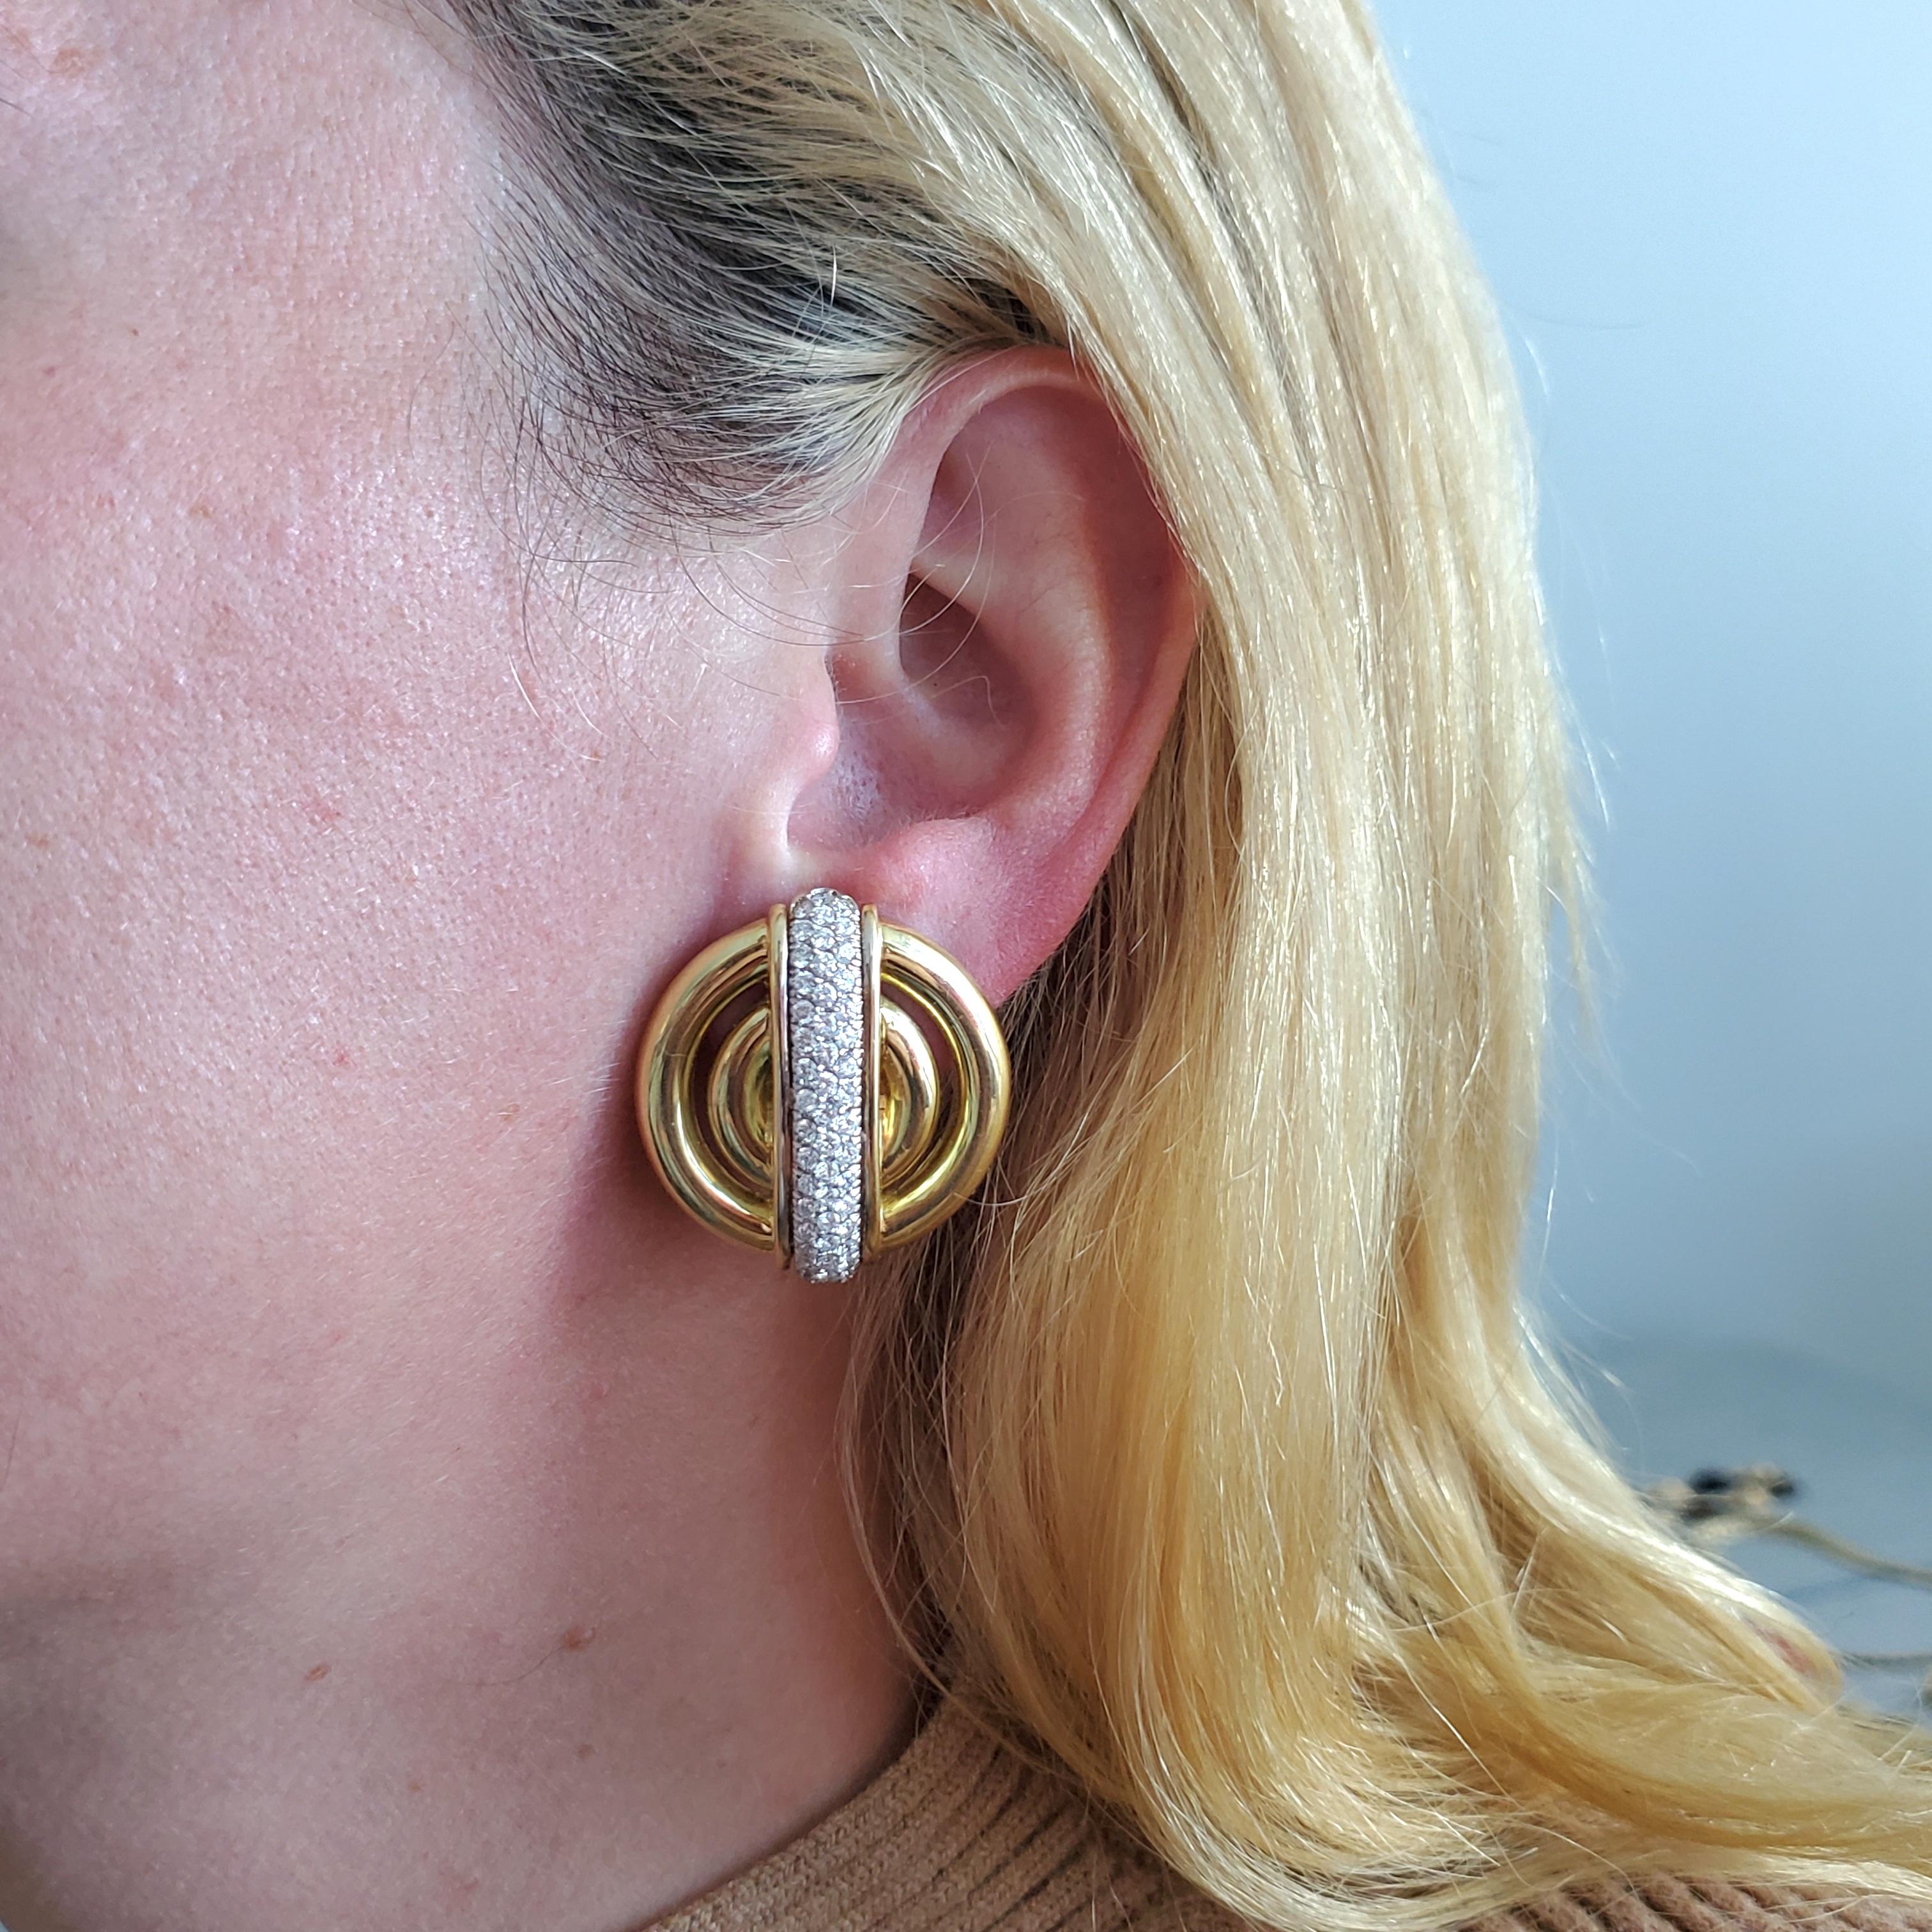 Pair of ear-clips designed by Aldo Cipullo for Cartier.

Very rare geometric round clip on earrings created in 1974, in the city of New York by Aldo Cipullo, during his collaboration period with the house of Cartier (1969-1975) as a designer. This